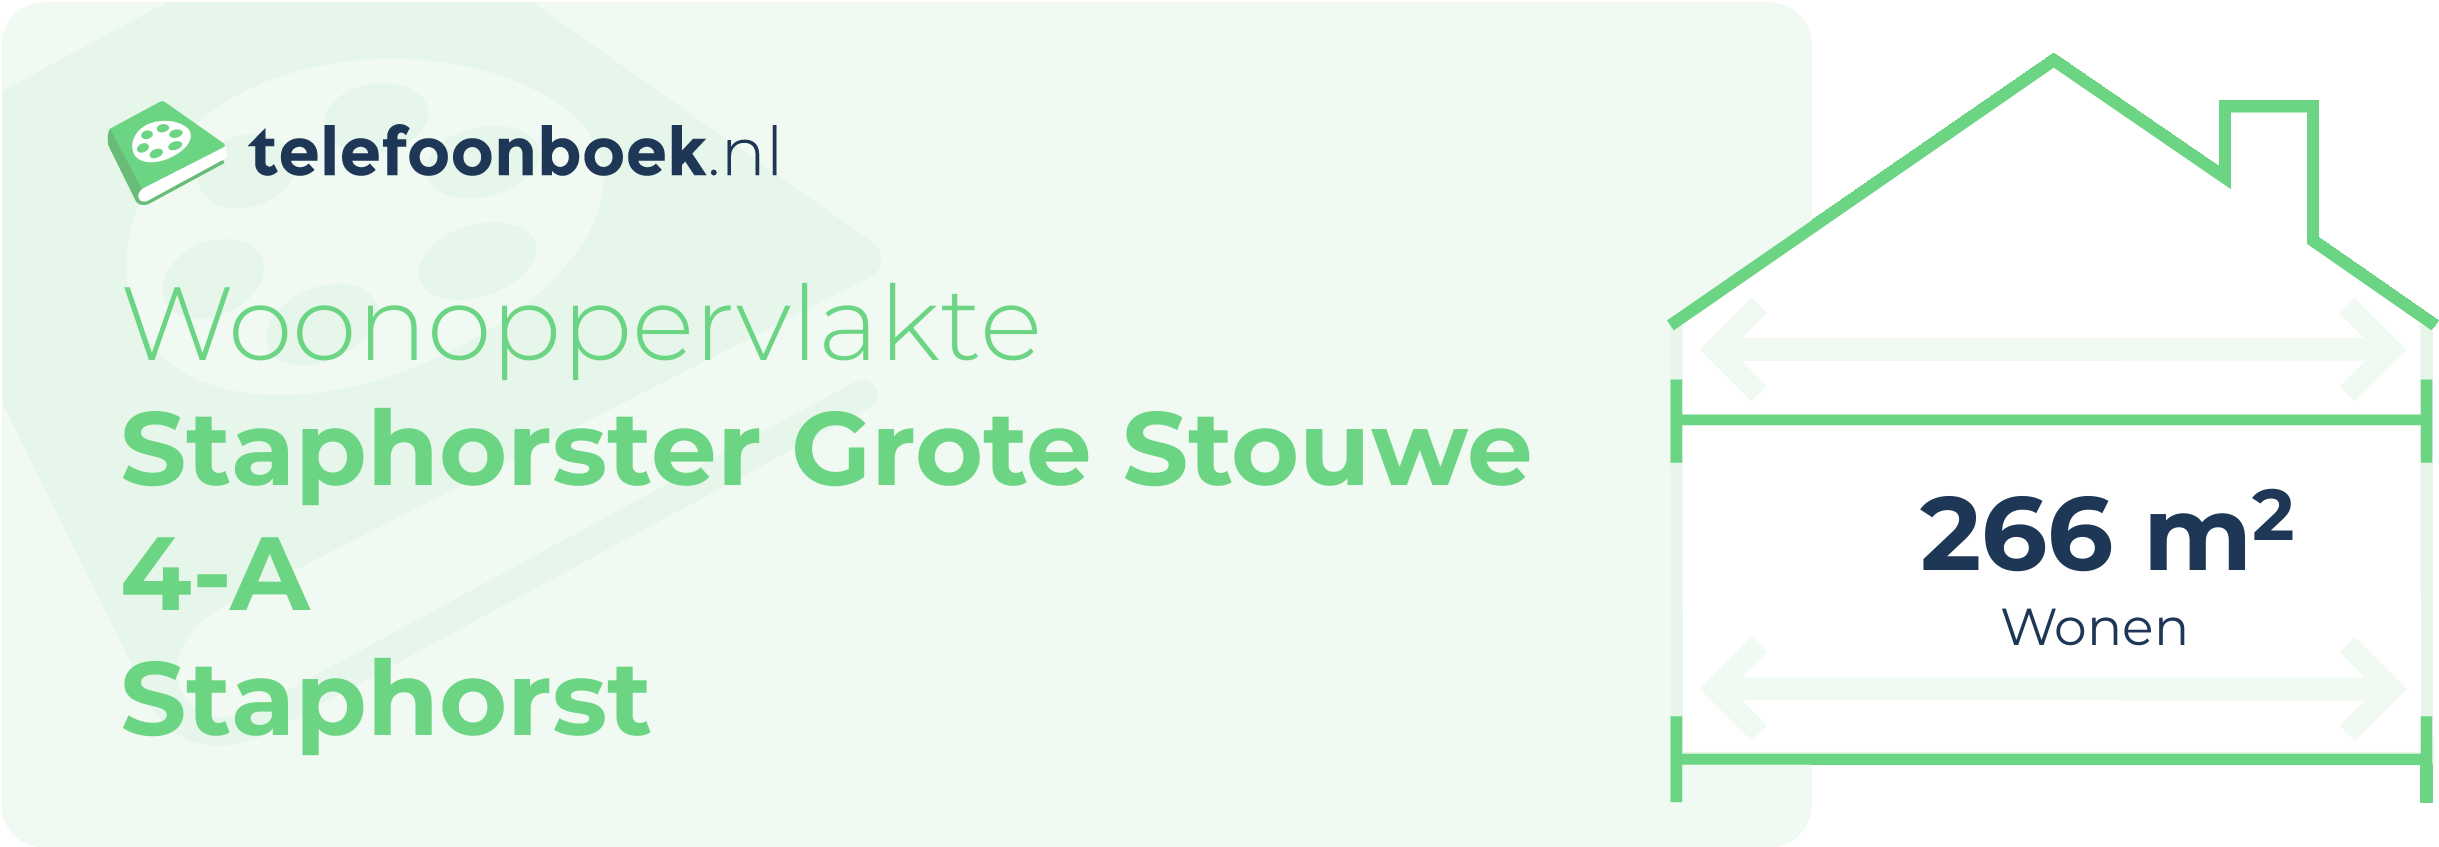 Woonoppervlakte Staphorster Grote Stouwe 4-A Staphorst